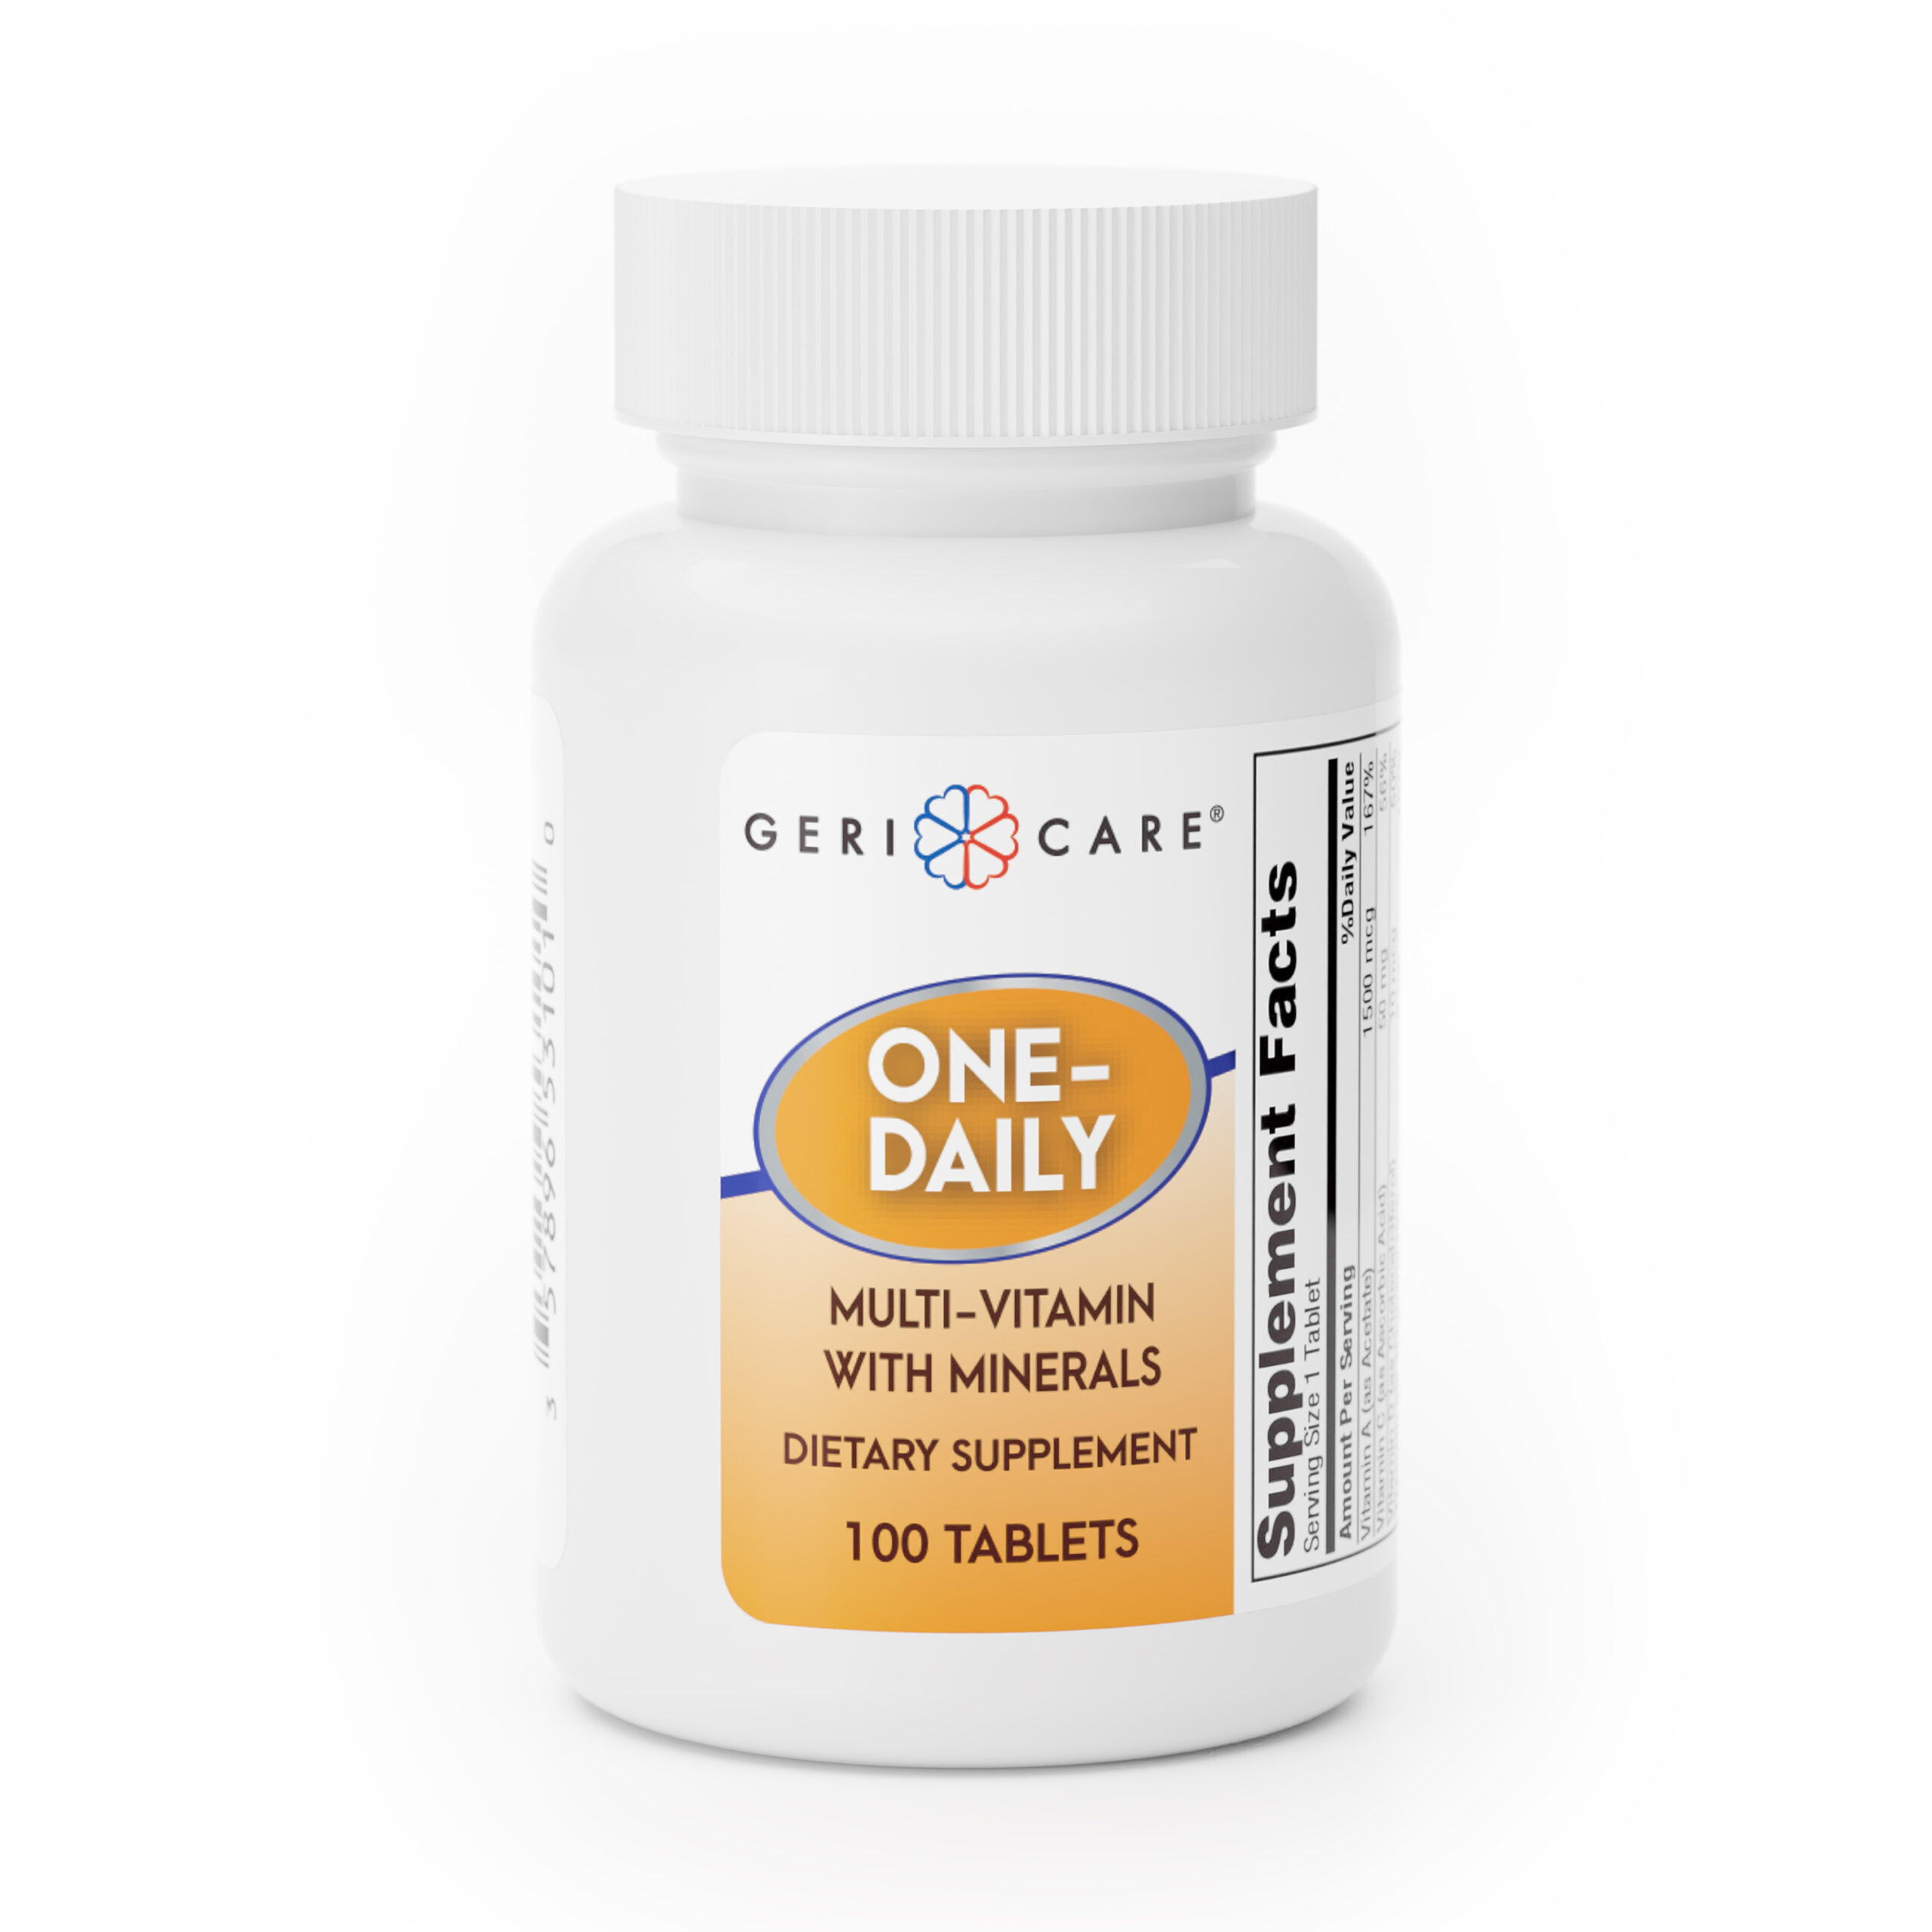 One-Daily Multi-Vitamin + Minerals – 100 Tablets